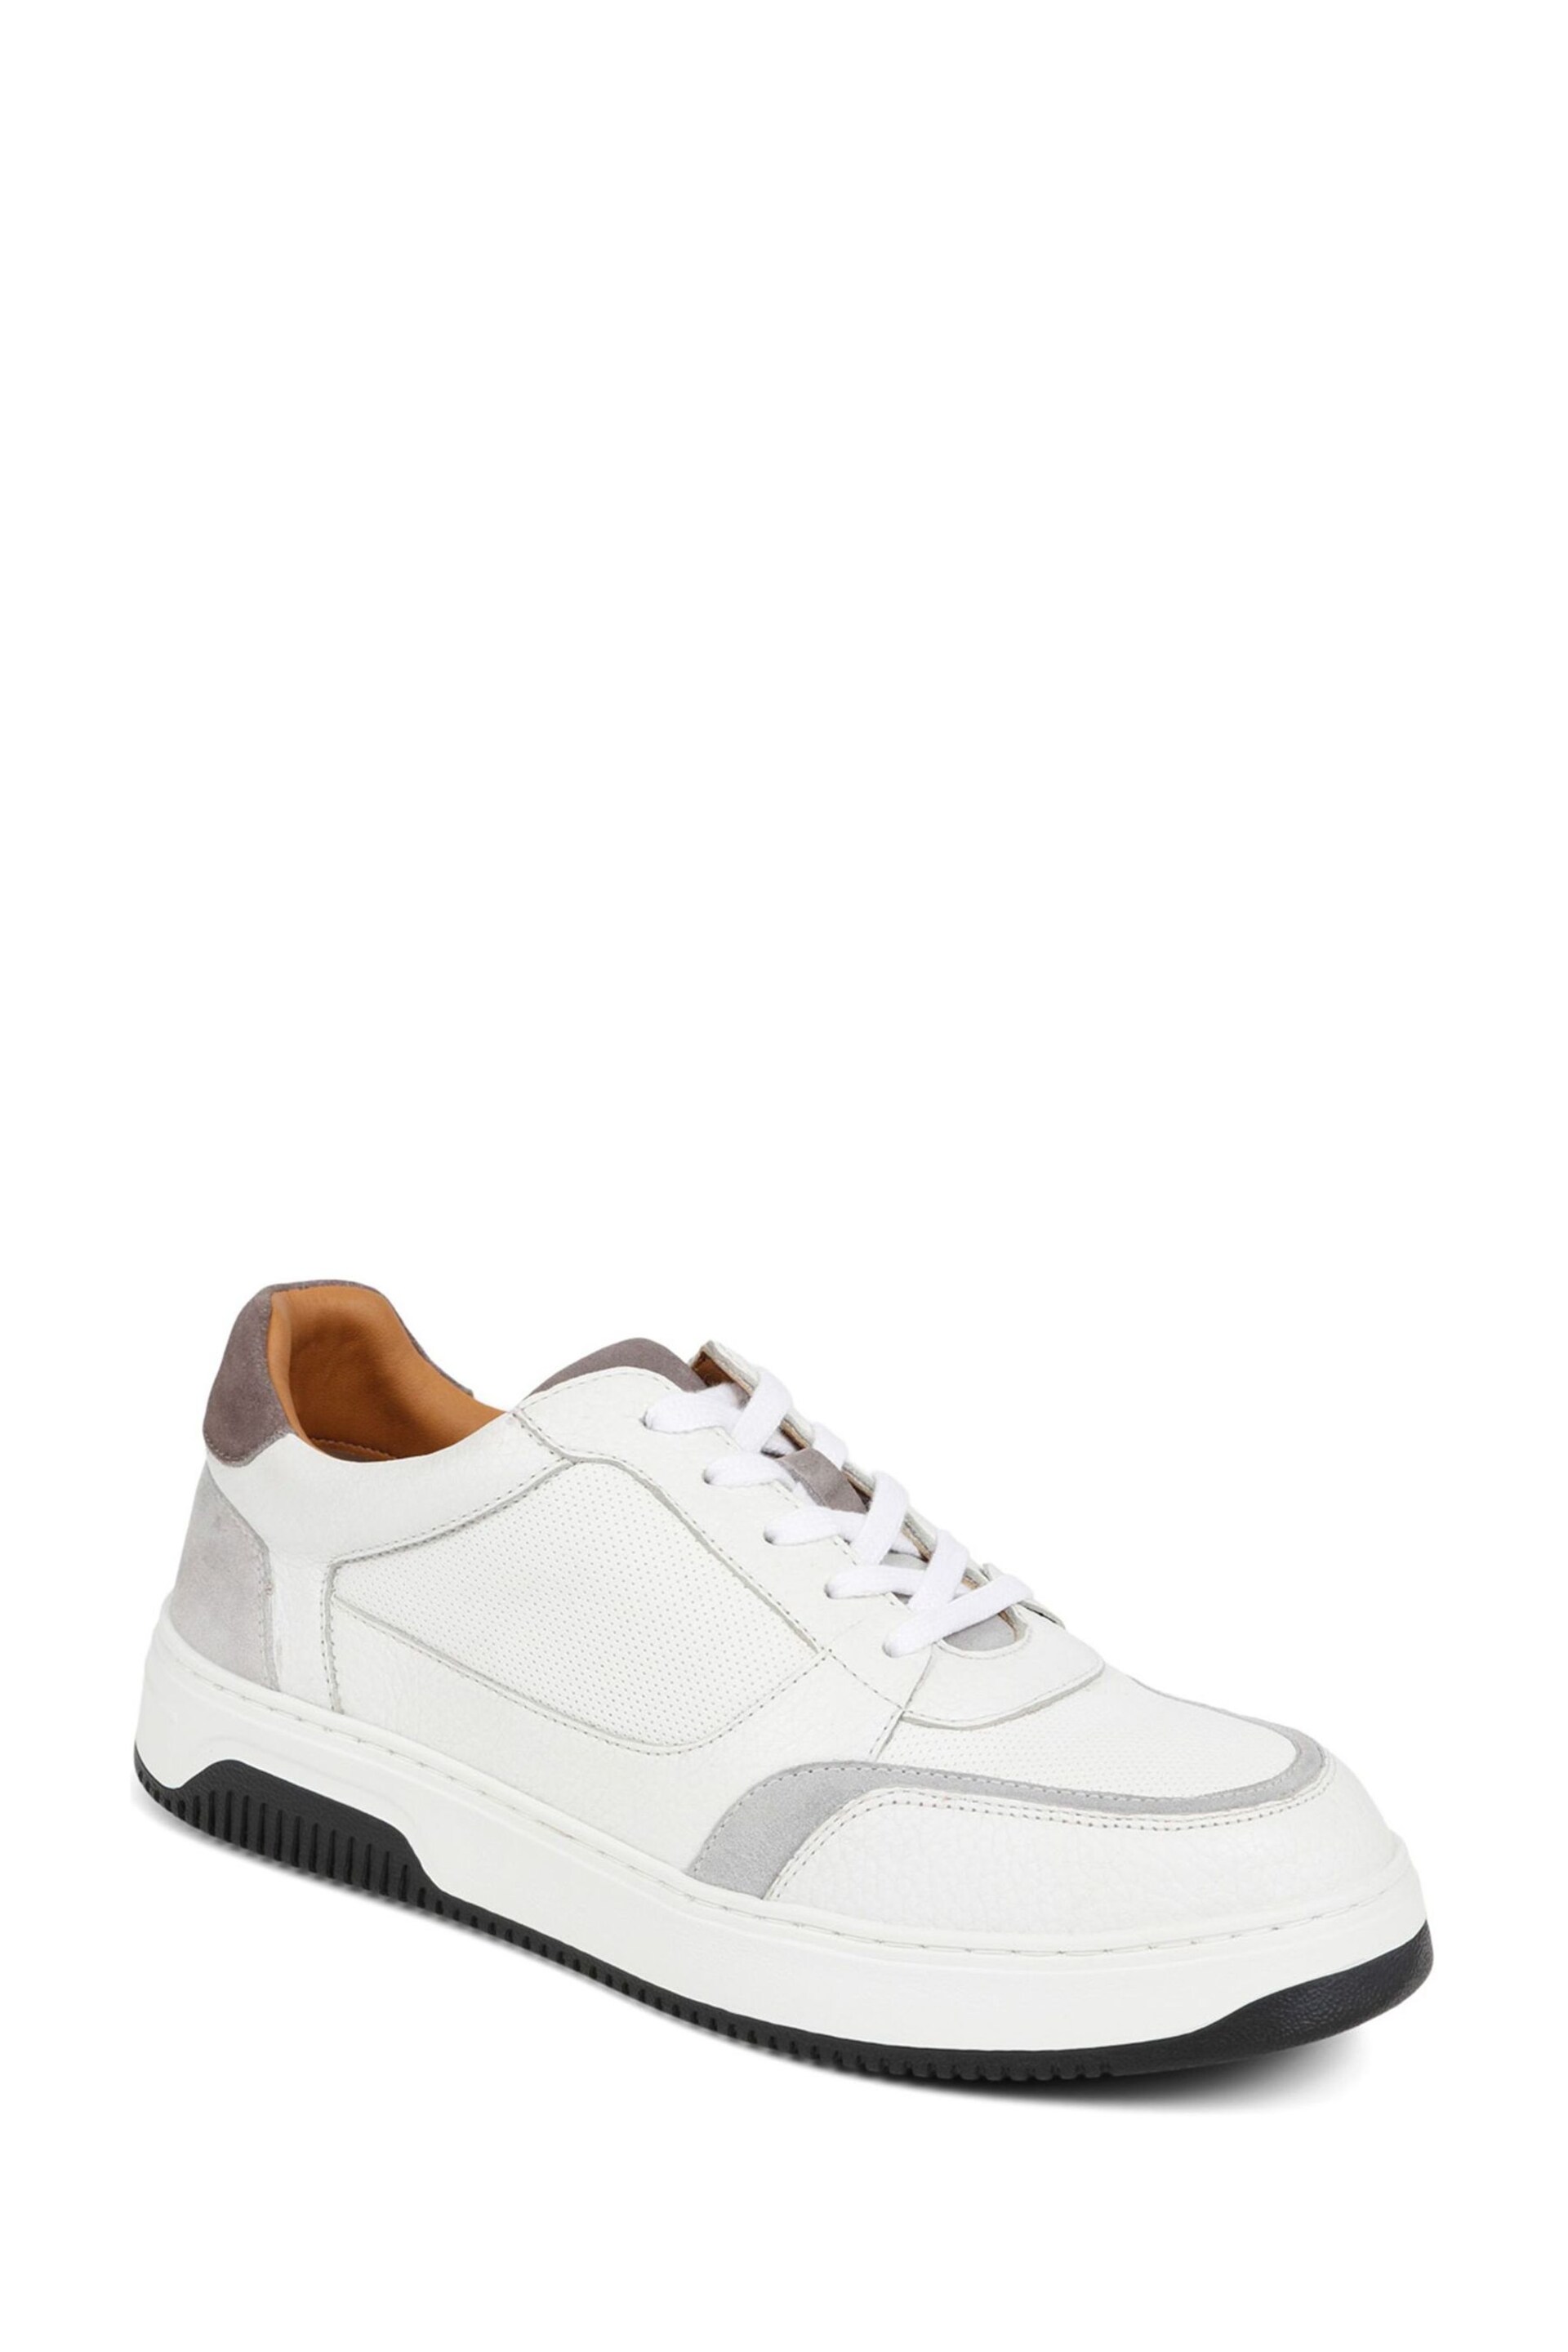 Pavers White Lace-Up Leather Trainers - Image 2 of 5